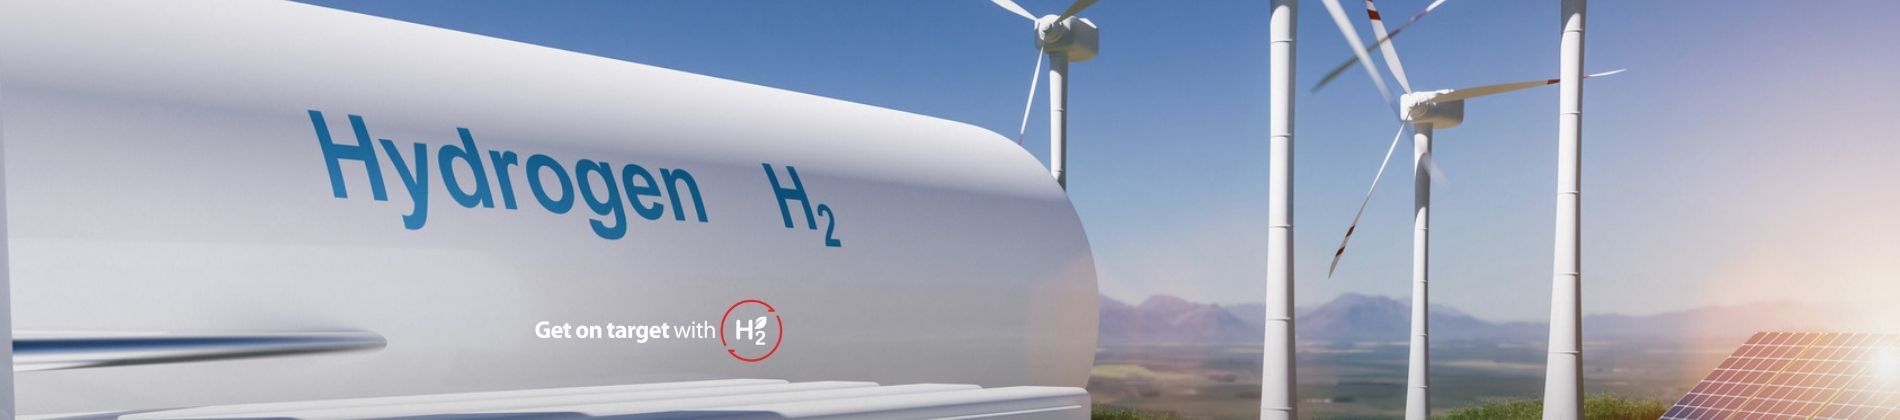 Hydrogen tank with windmills and solar panels in the background